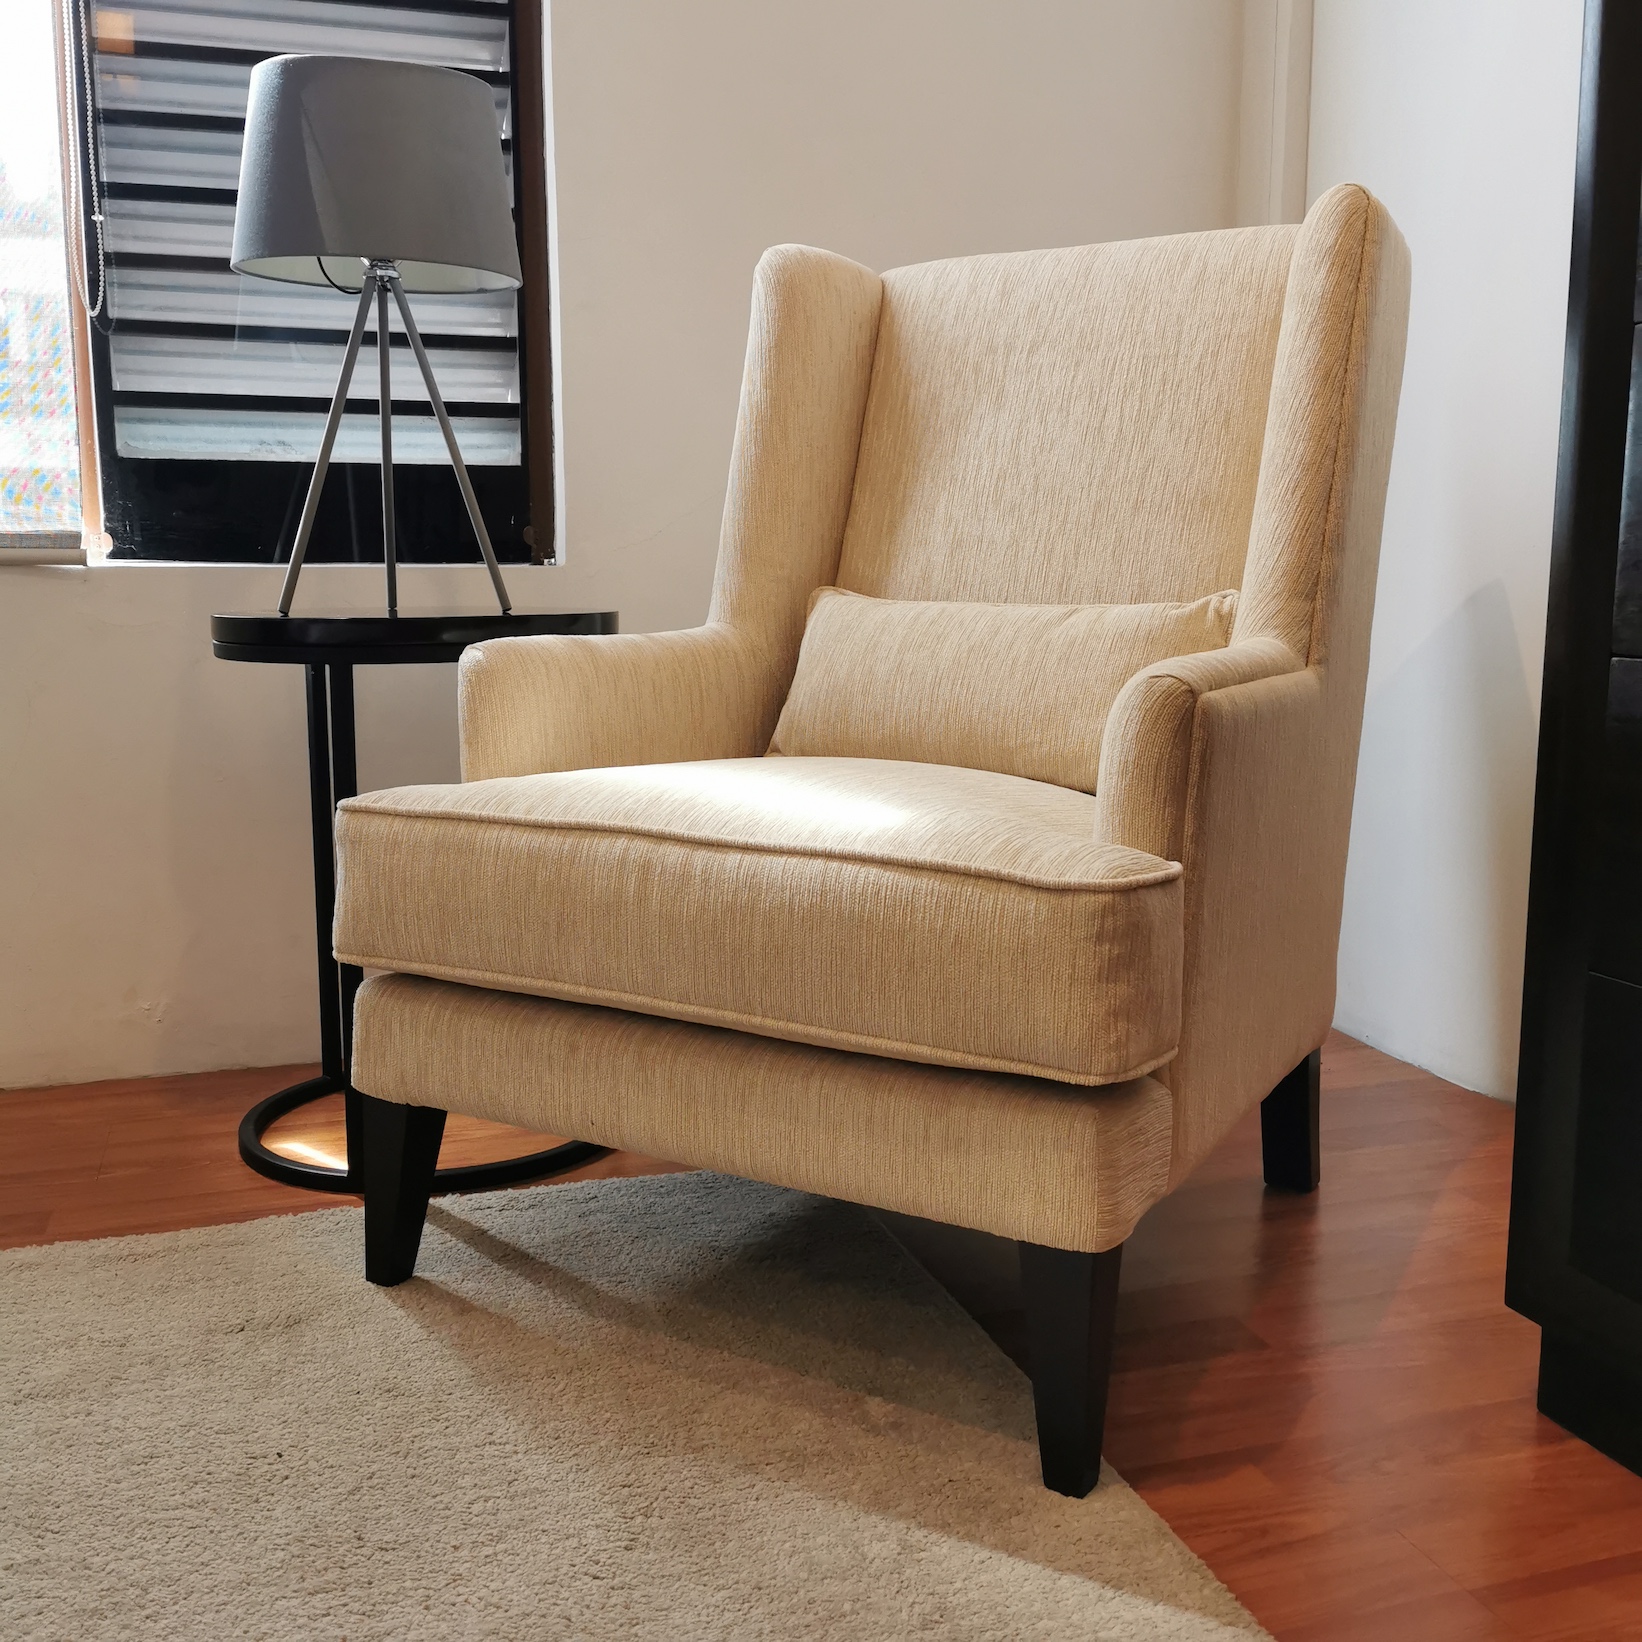 Choose from our Asian-Style Dynasty armchairs, Classic Overstuffed armchairs, or a Modern Classic Wingback Chair to complete your Bedroom or Study.  All can come with a footstool upon request.